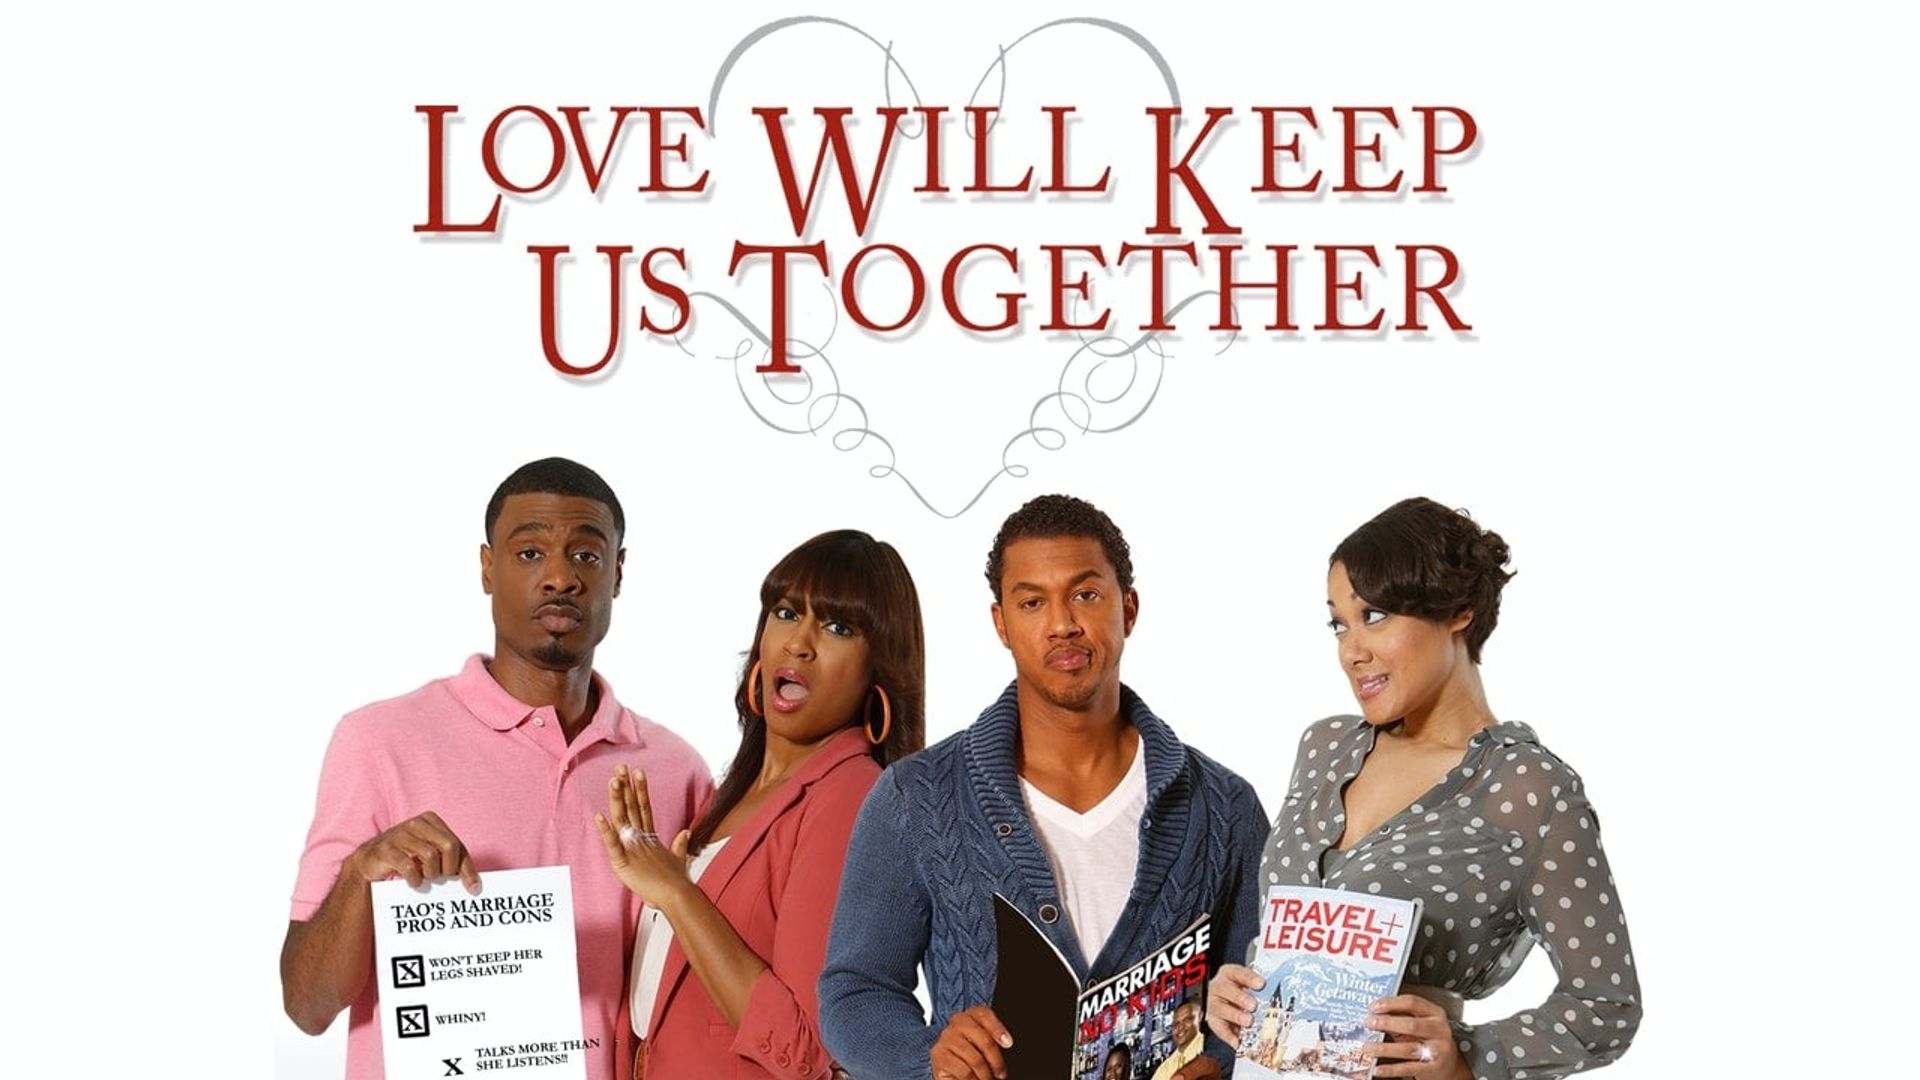 Love Will Keep Us Together background